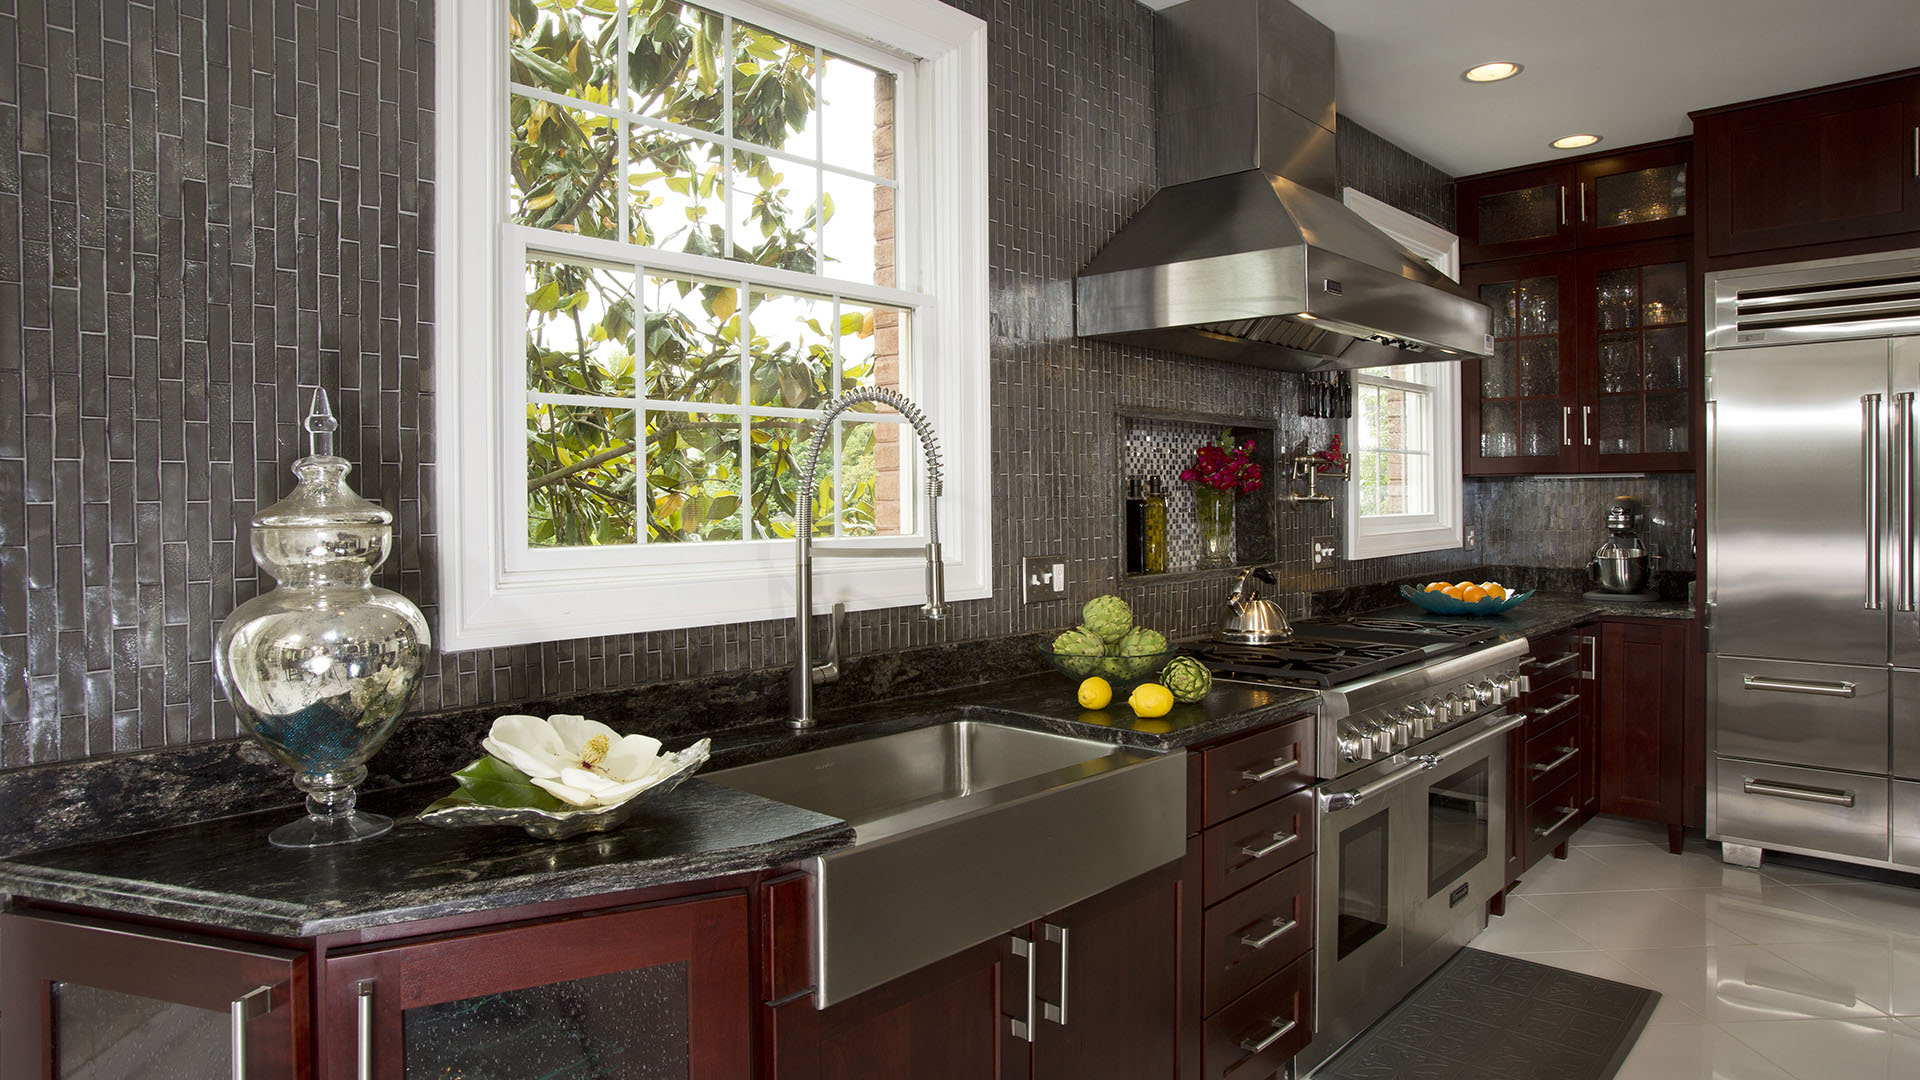 NARI Capital CotY, Honorable Mention Award Winner, Residential Kitchen $50,000 to $100,000